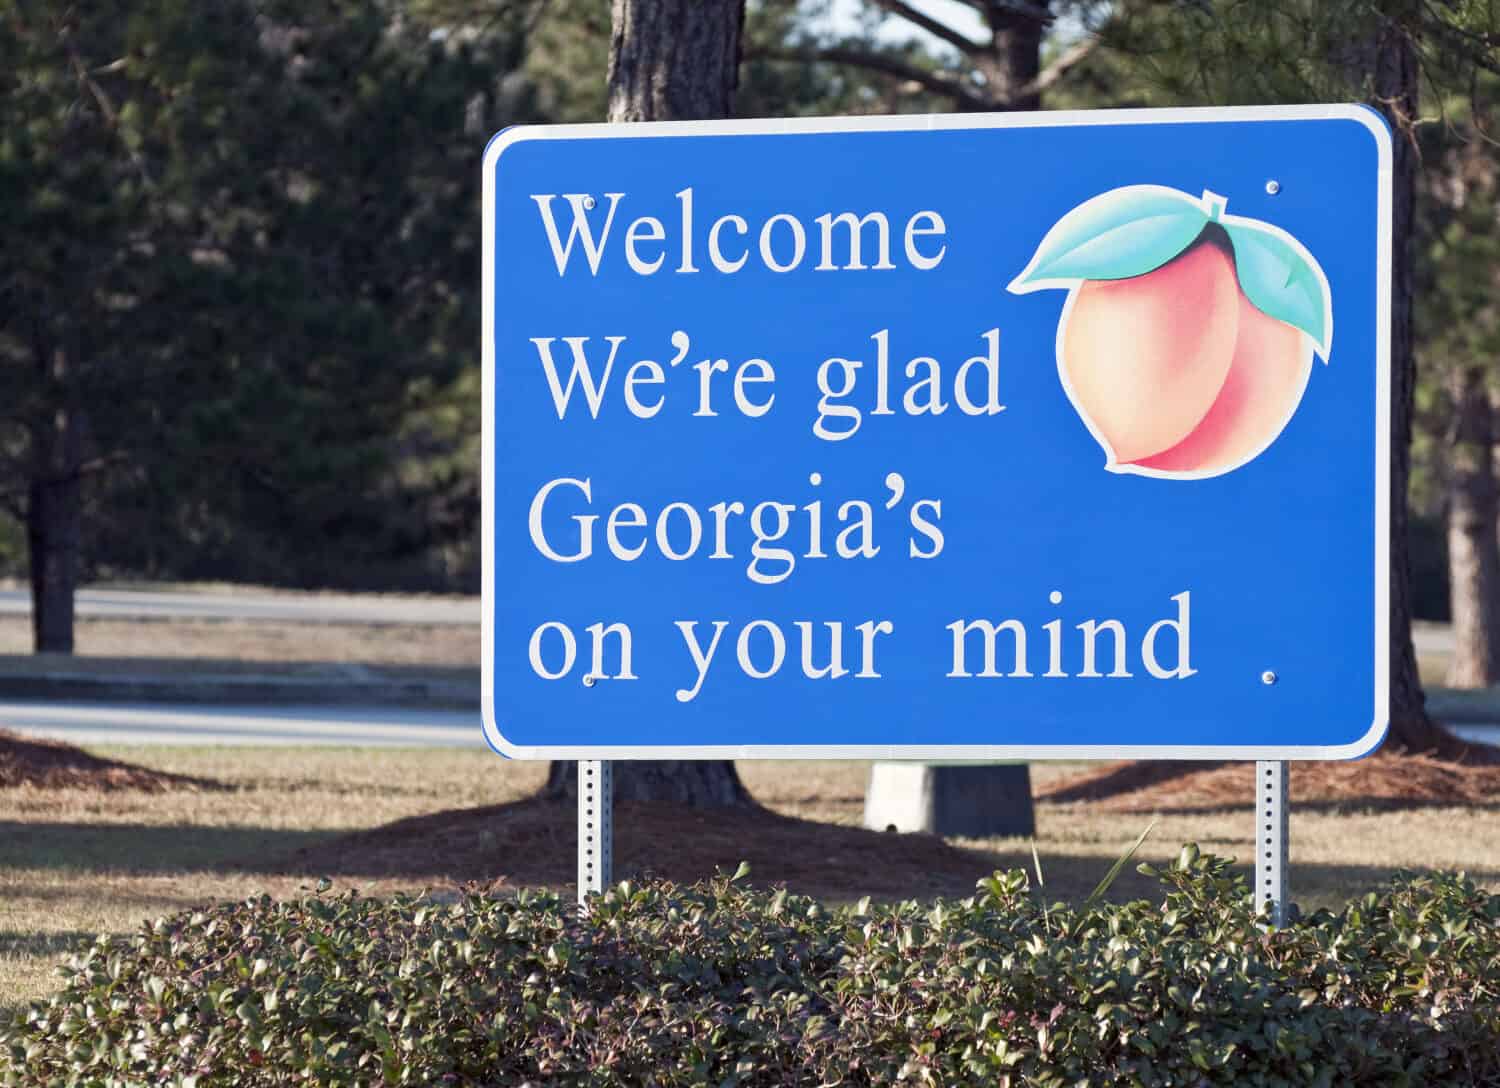 A welcome sign at the Georgia state line